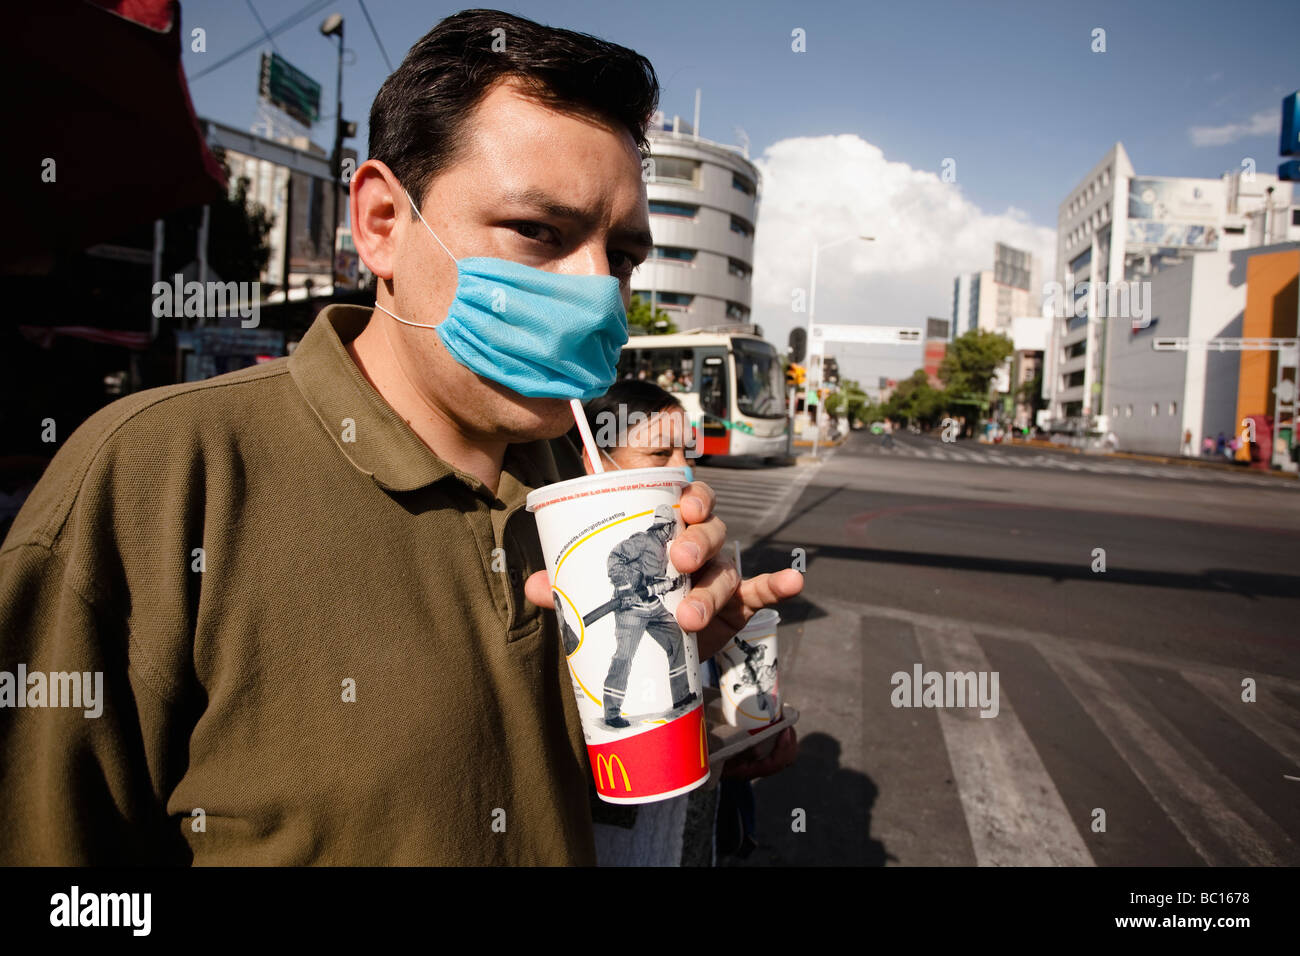 A man in the street drinks from a McDonald's cup through a blue mask during the swine flu epidemic in Mexico City. Stock Photo